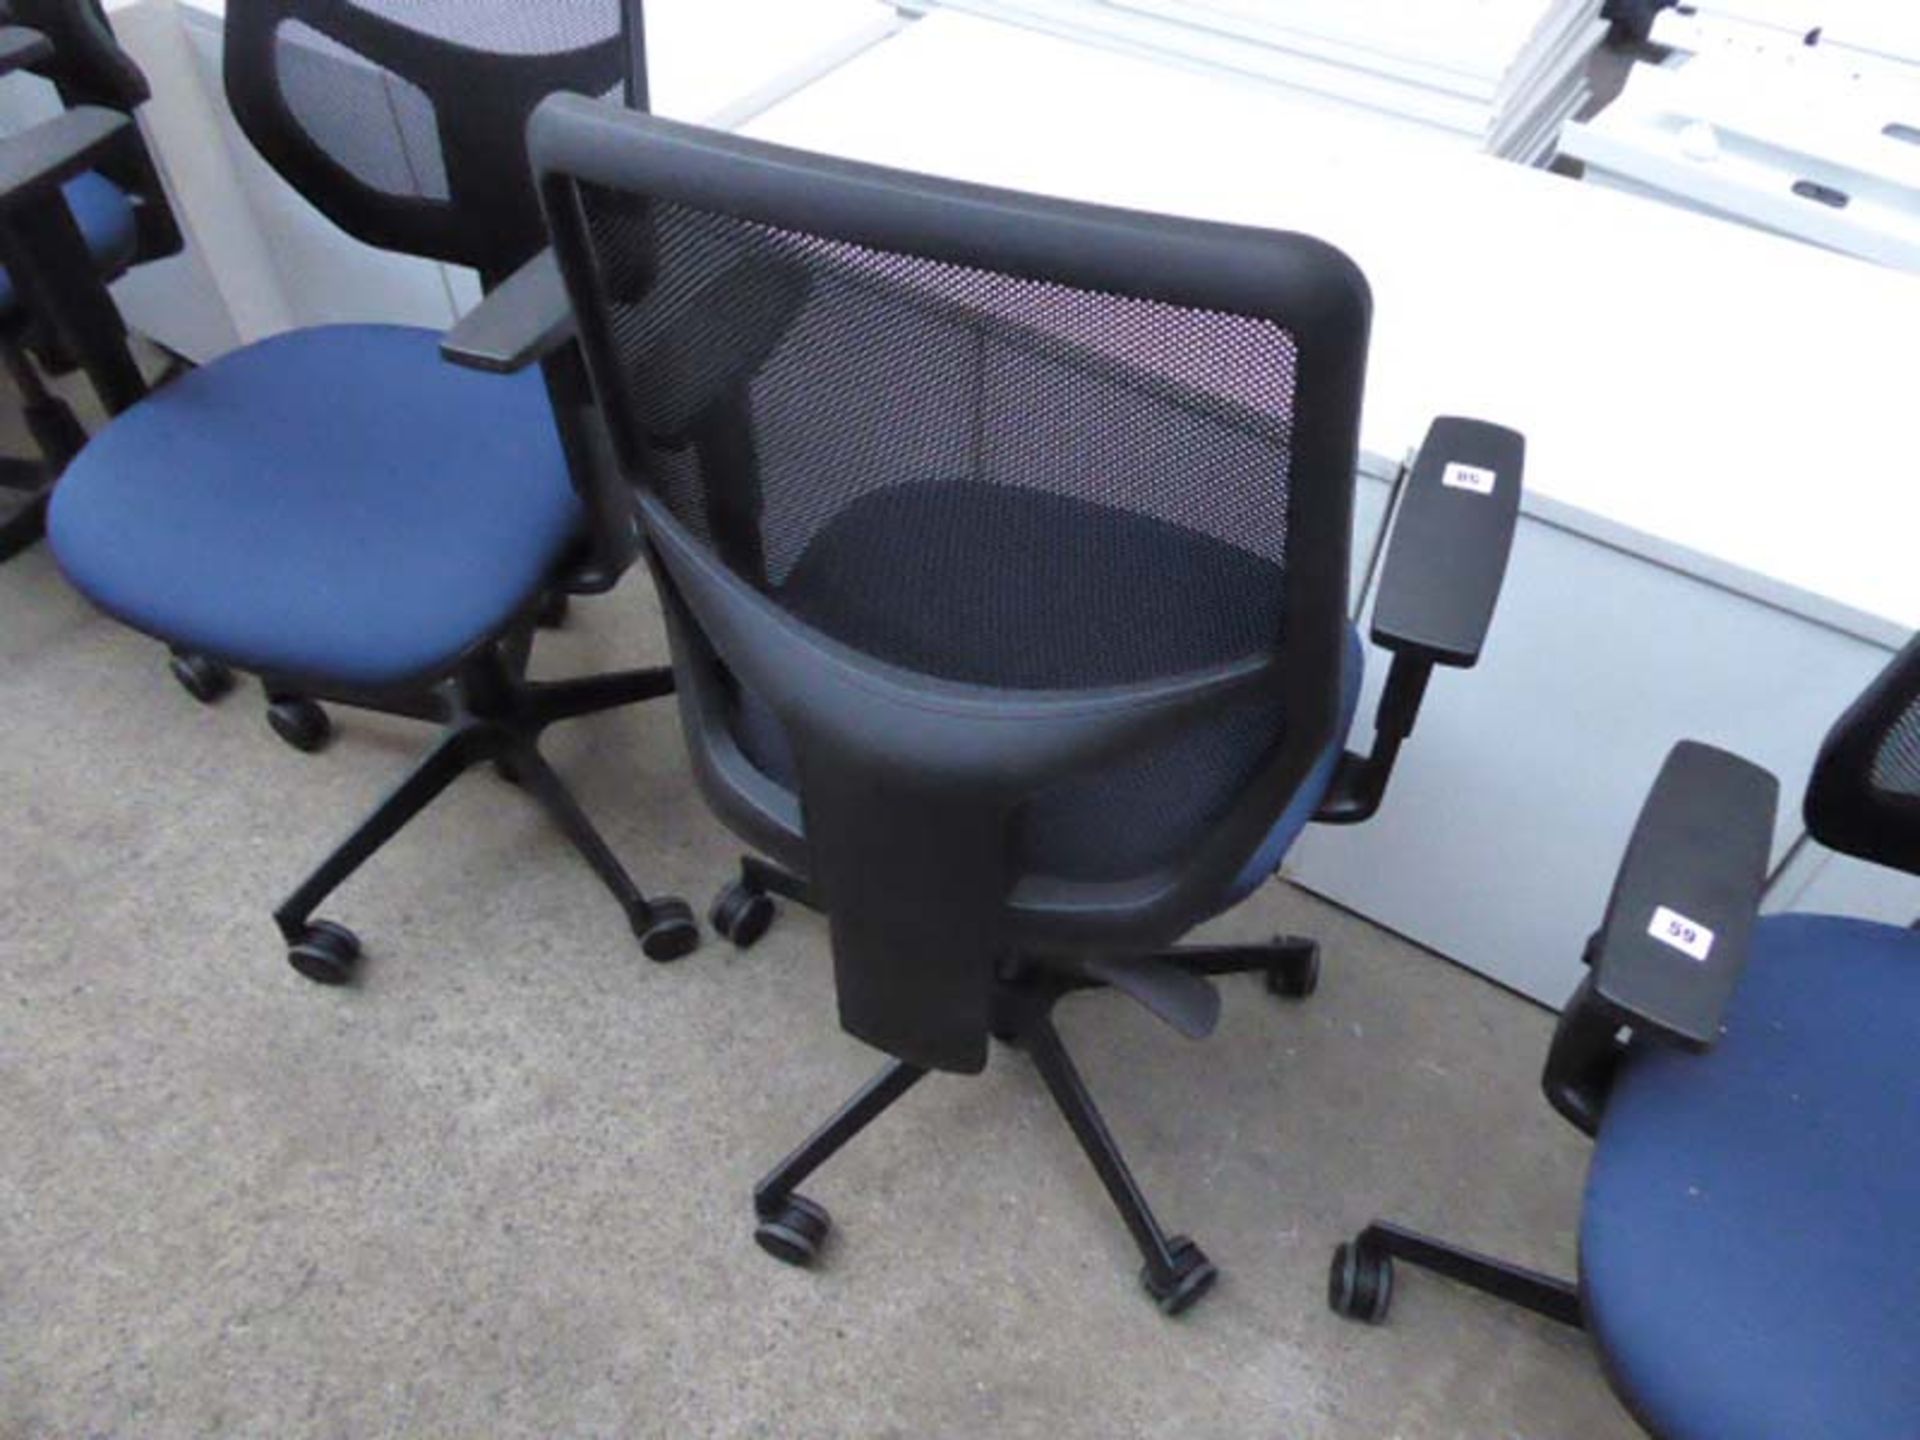 Nomiqe Remi Mesh office swivel armchair with blue cloth pad and black mesh back - Image 2 of 2